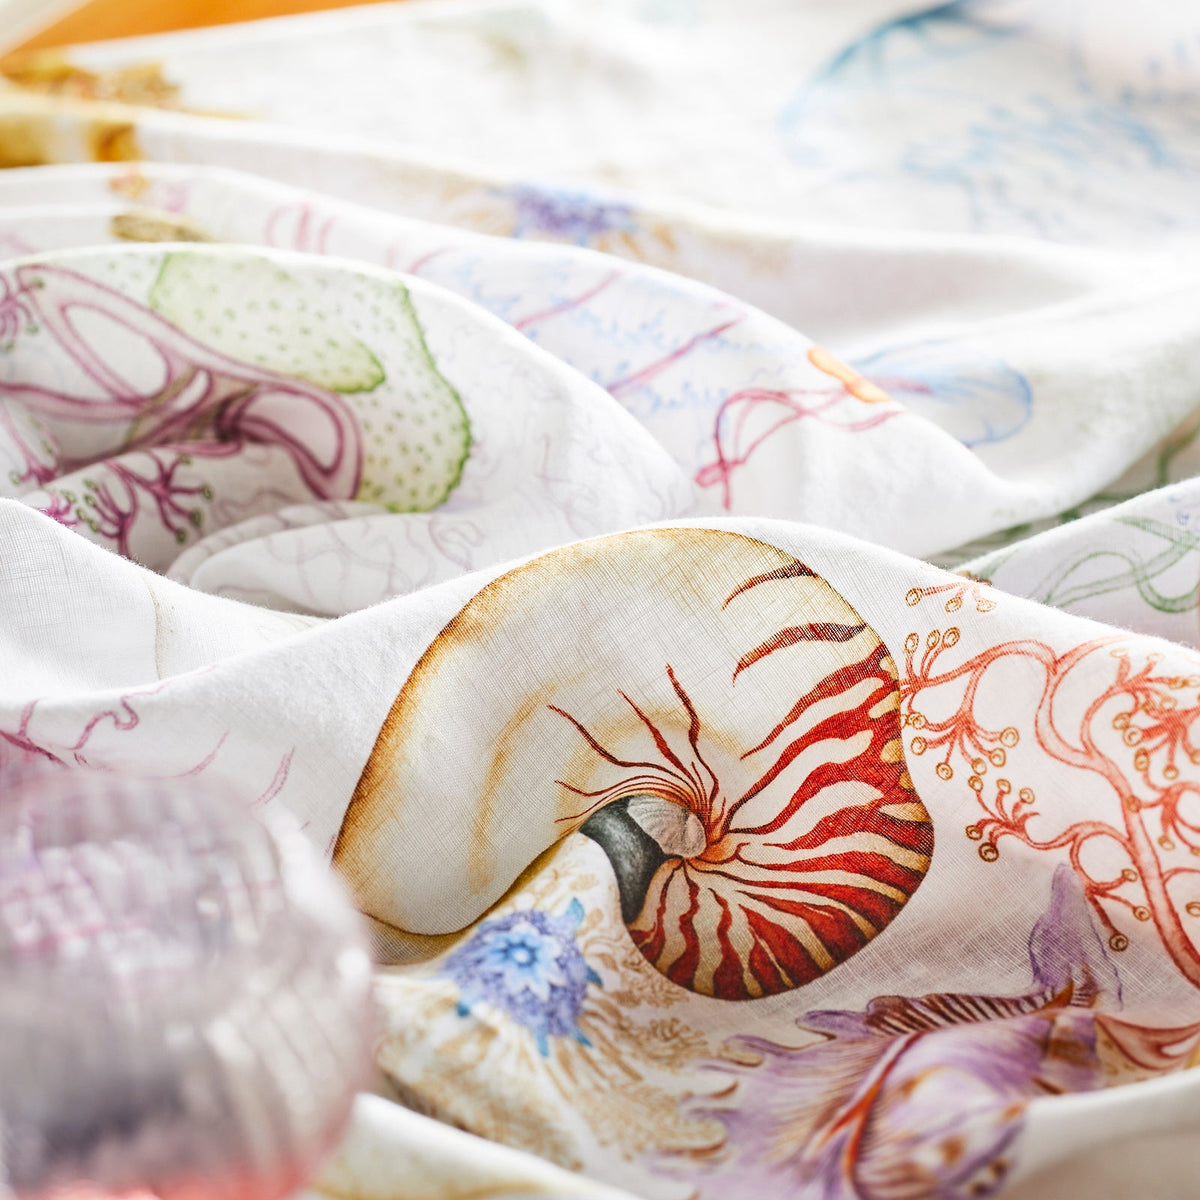 A set of colorful Reef Hemp Tablecloth towels with playful nautilus shells on them, from the brand TTT.